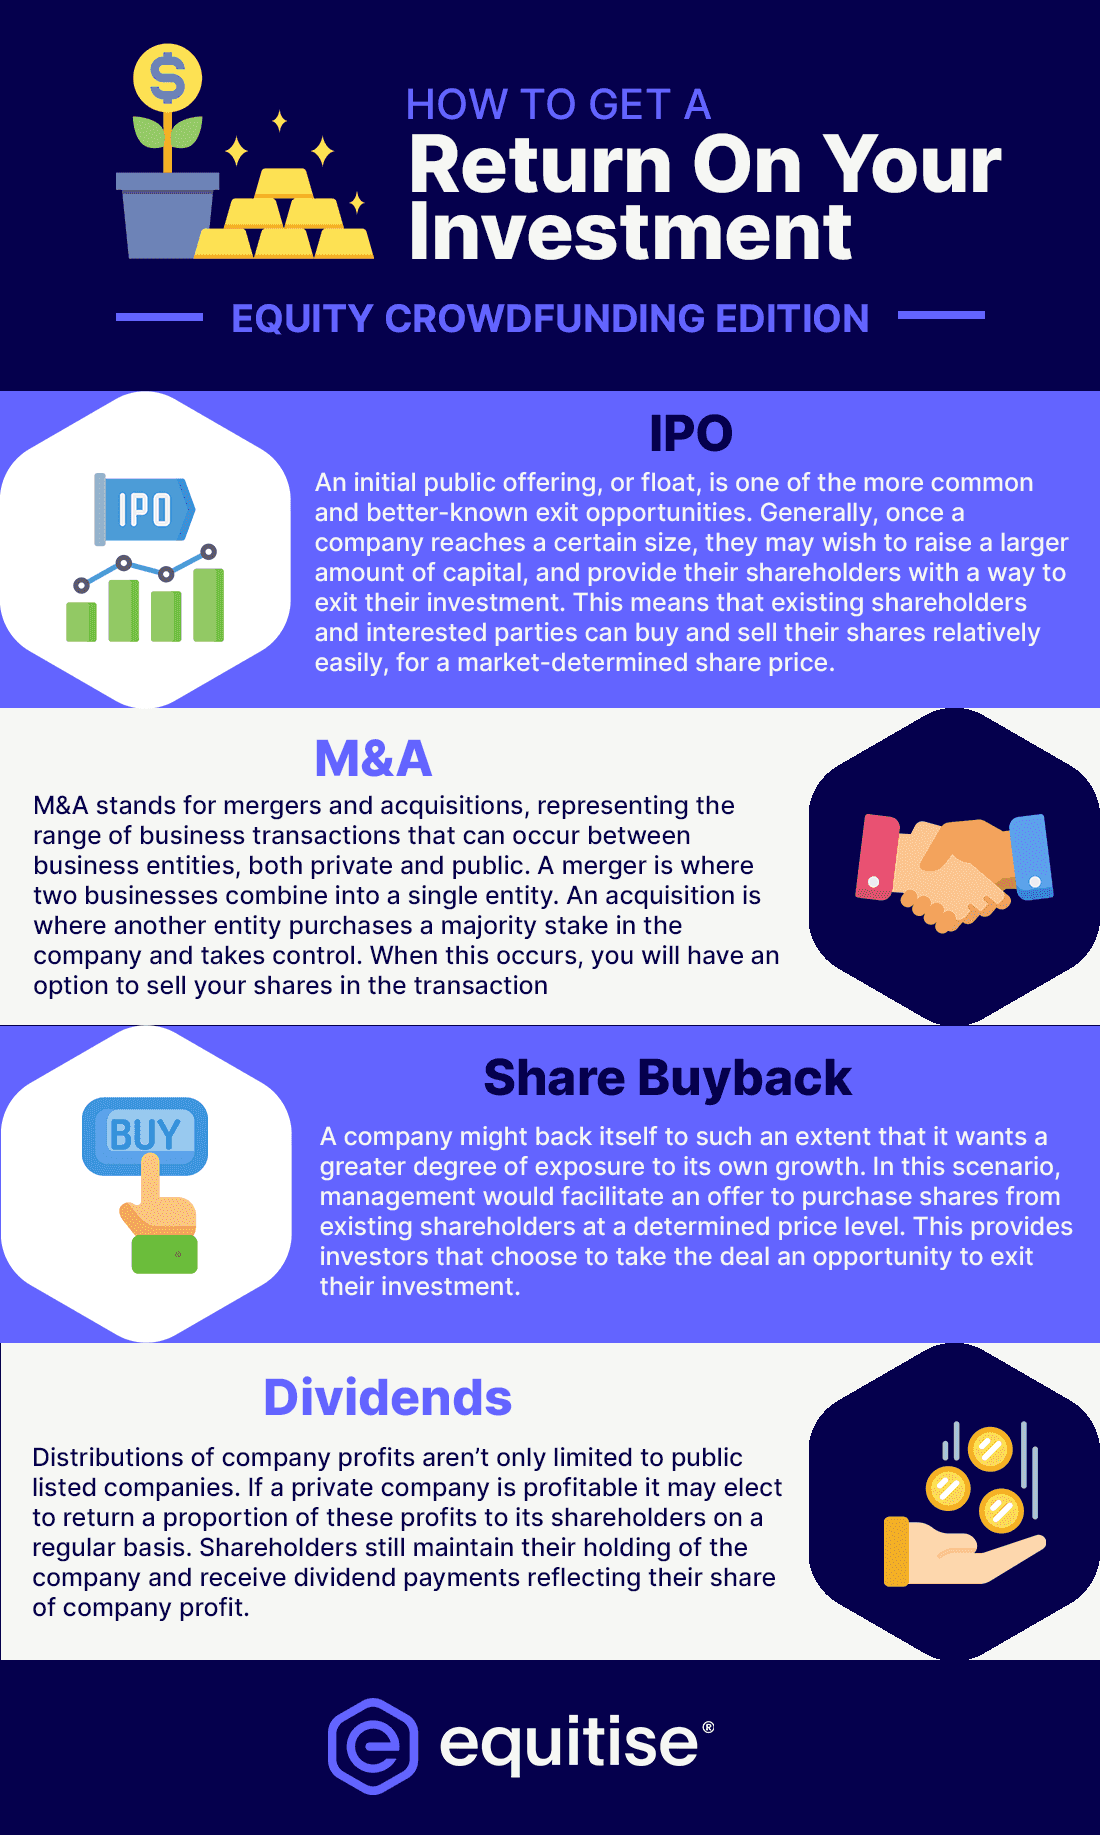 An infographic about the different ways you can earn a return on your investment with equity crowdfunding